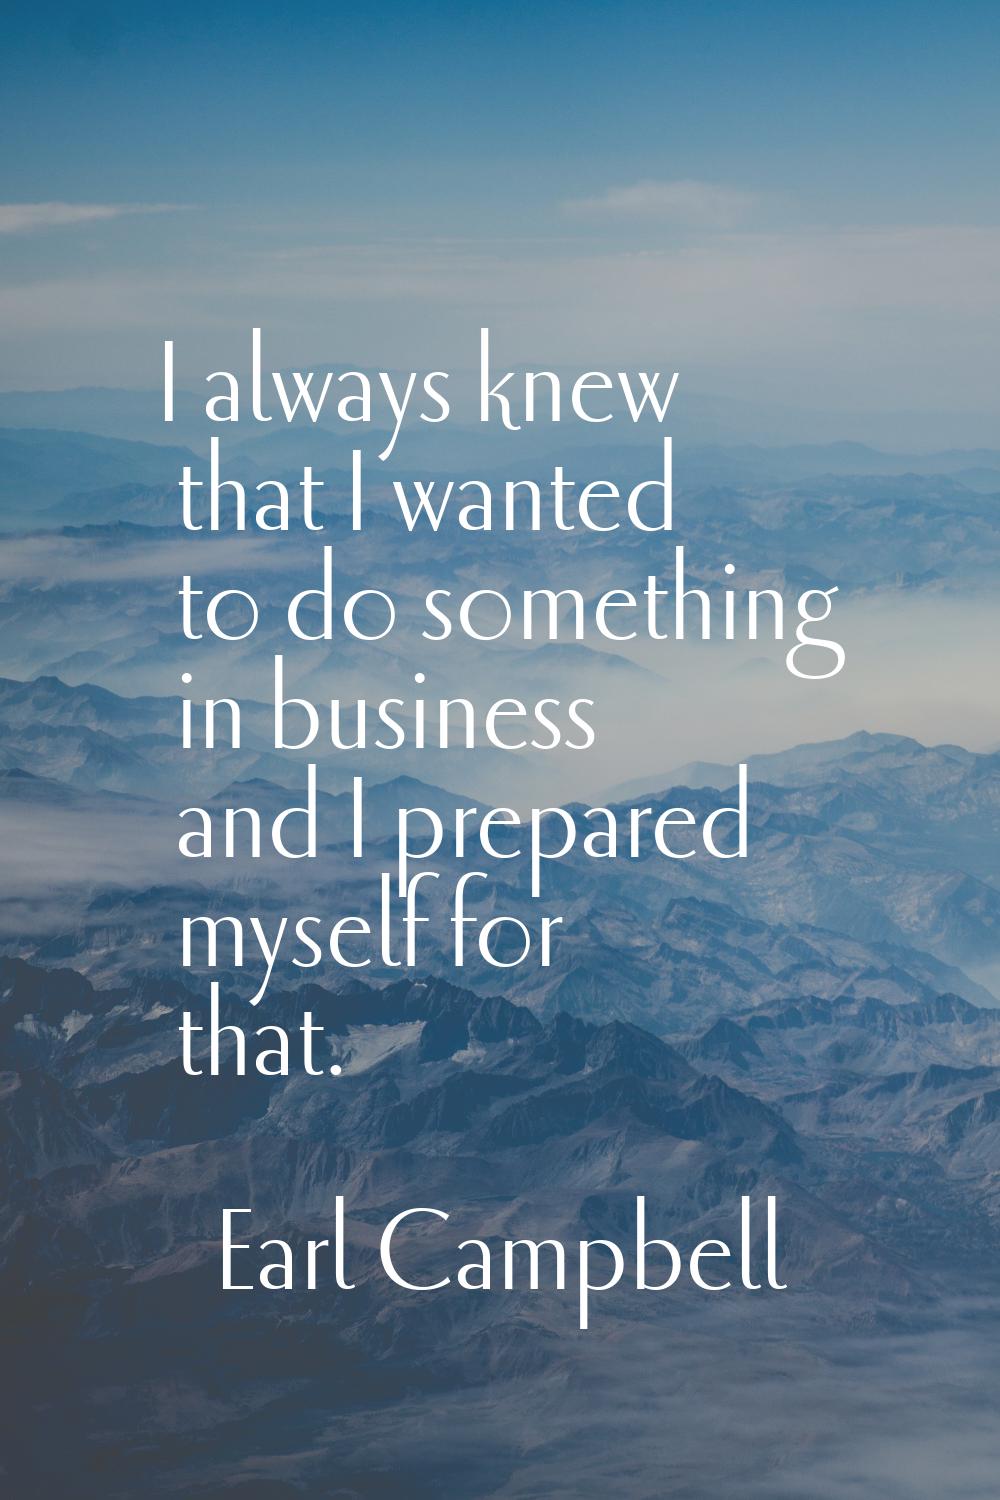 I always knew that I wanted to do something in business and I prepared myself for that.